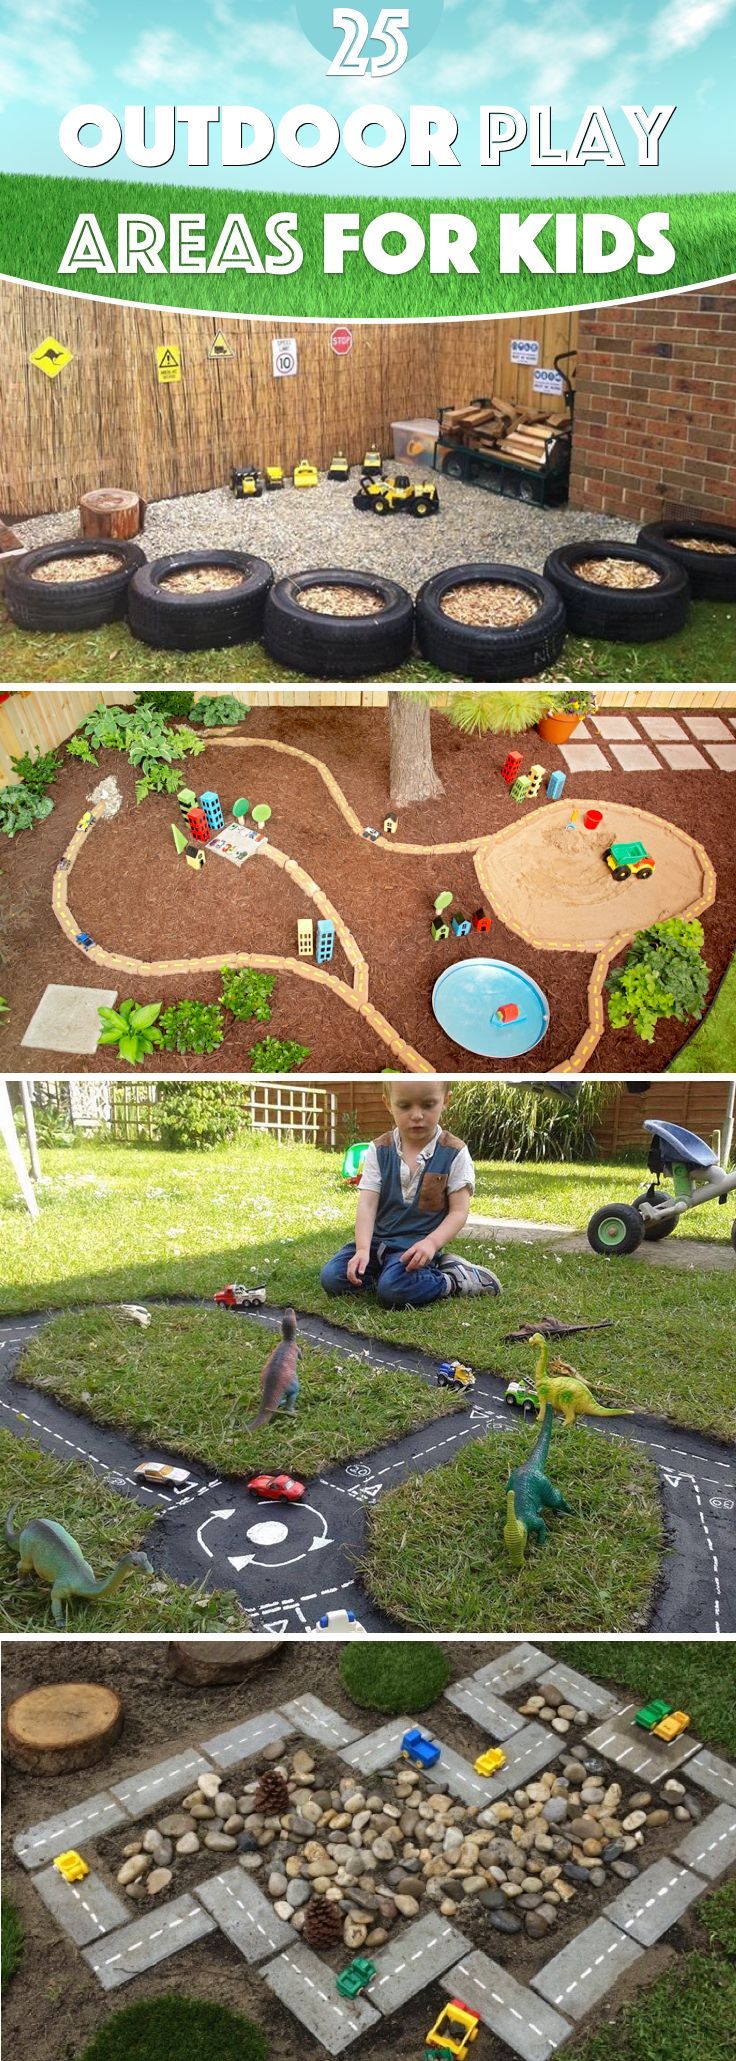 25 Outdoor Play Areas For Kids Transforming Regular Backyards Into Playtime Para...